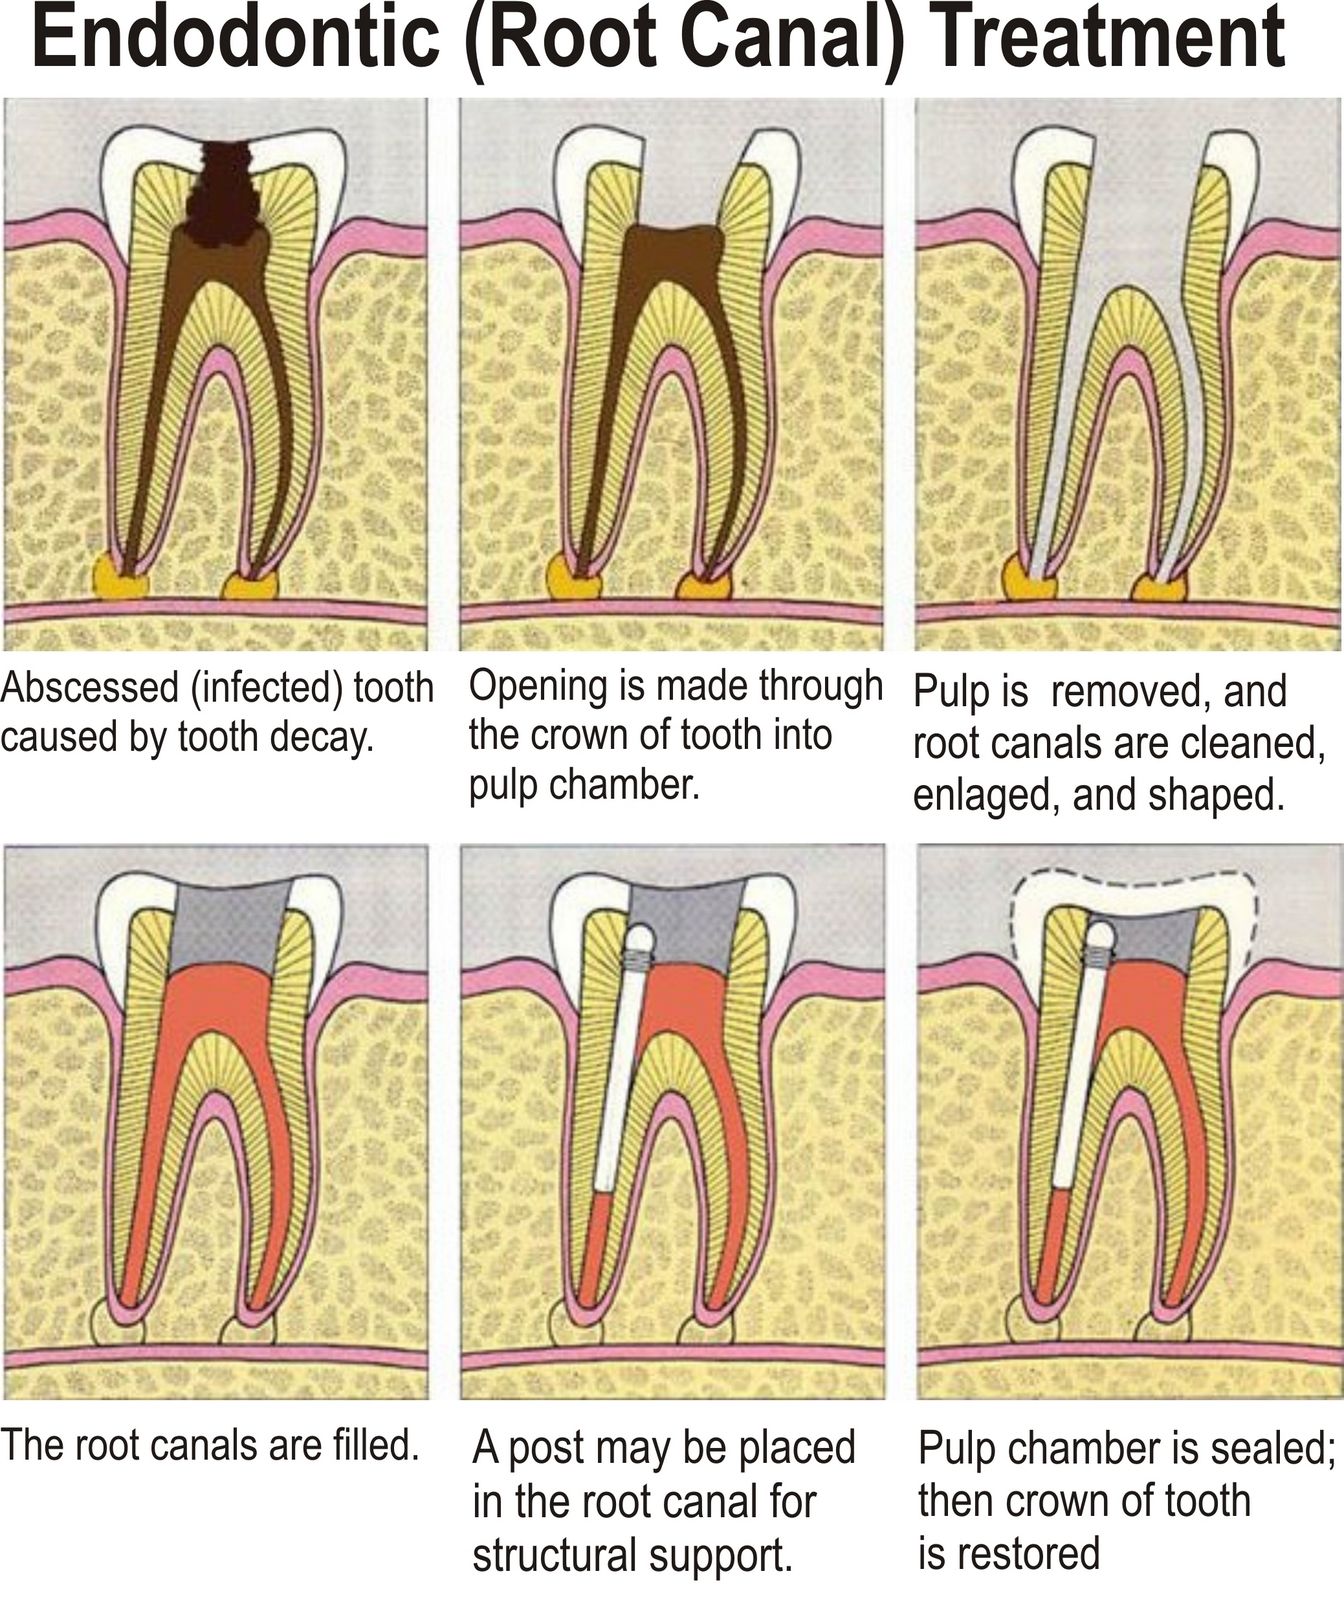 Precautions after root canal treatment